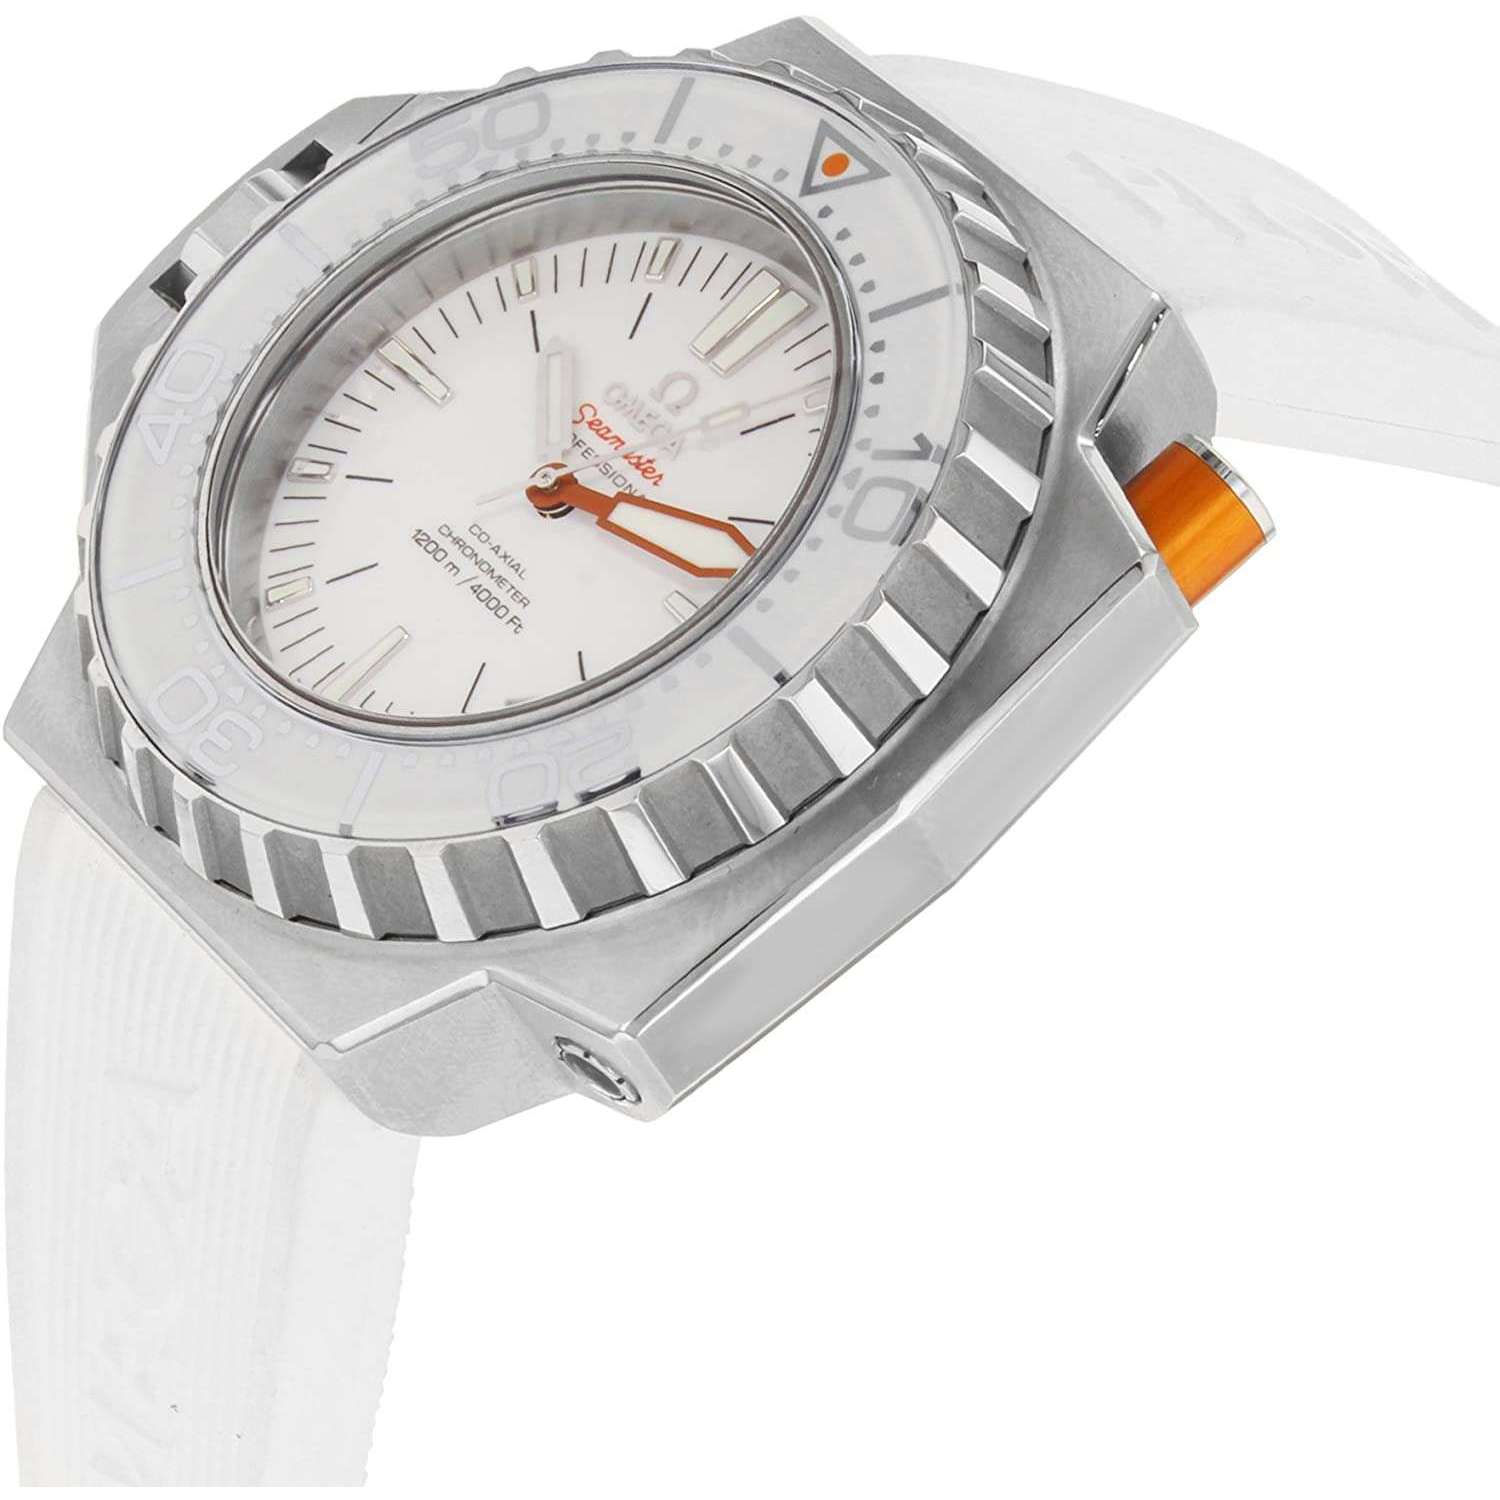 ROOK JAPAN:OMEGA SEAMASTER PROFESSIONAL CO-AXIAL CHRONOMETER 48 MM MEN WATCH 224.32.55.21.04.001,Luxury Watch,Omega